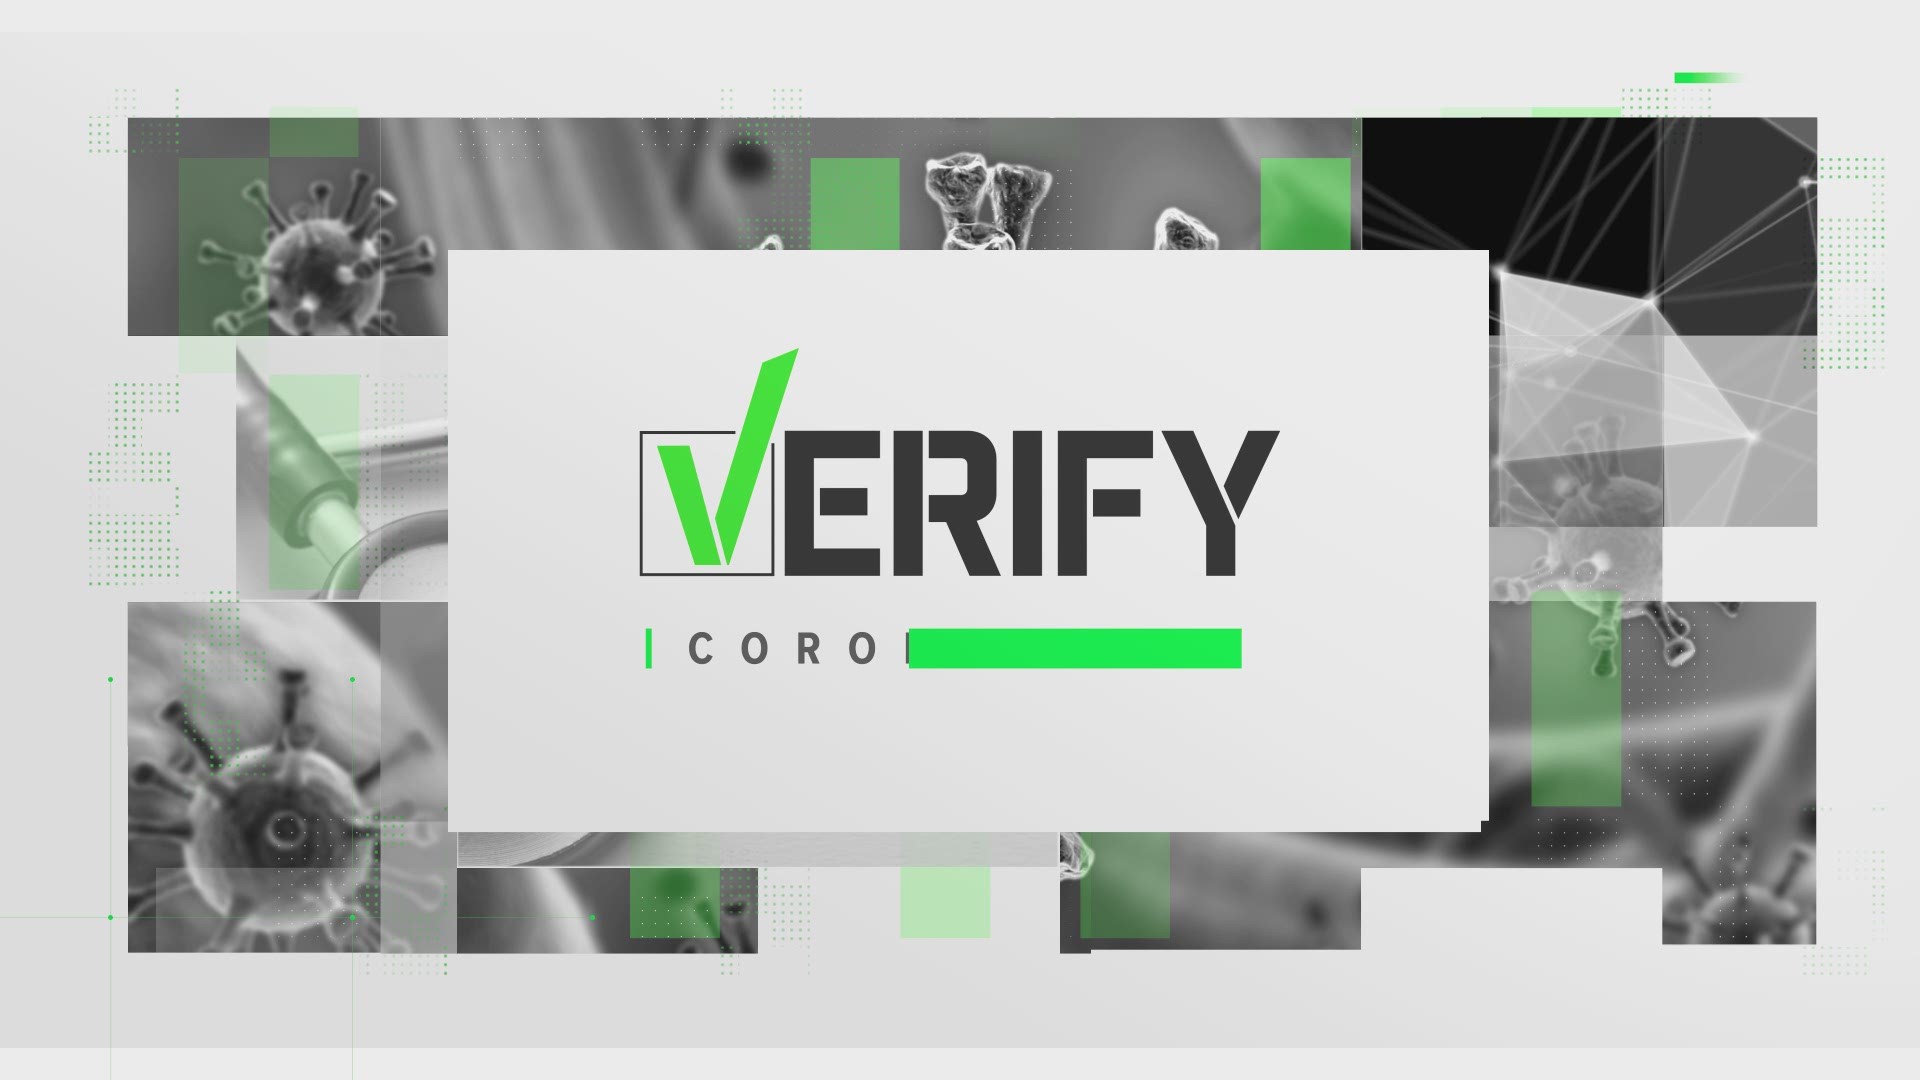 The VERIFY Team looked into which at home test kits have been approved by the Food And Drug Administration.